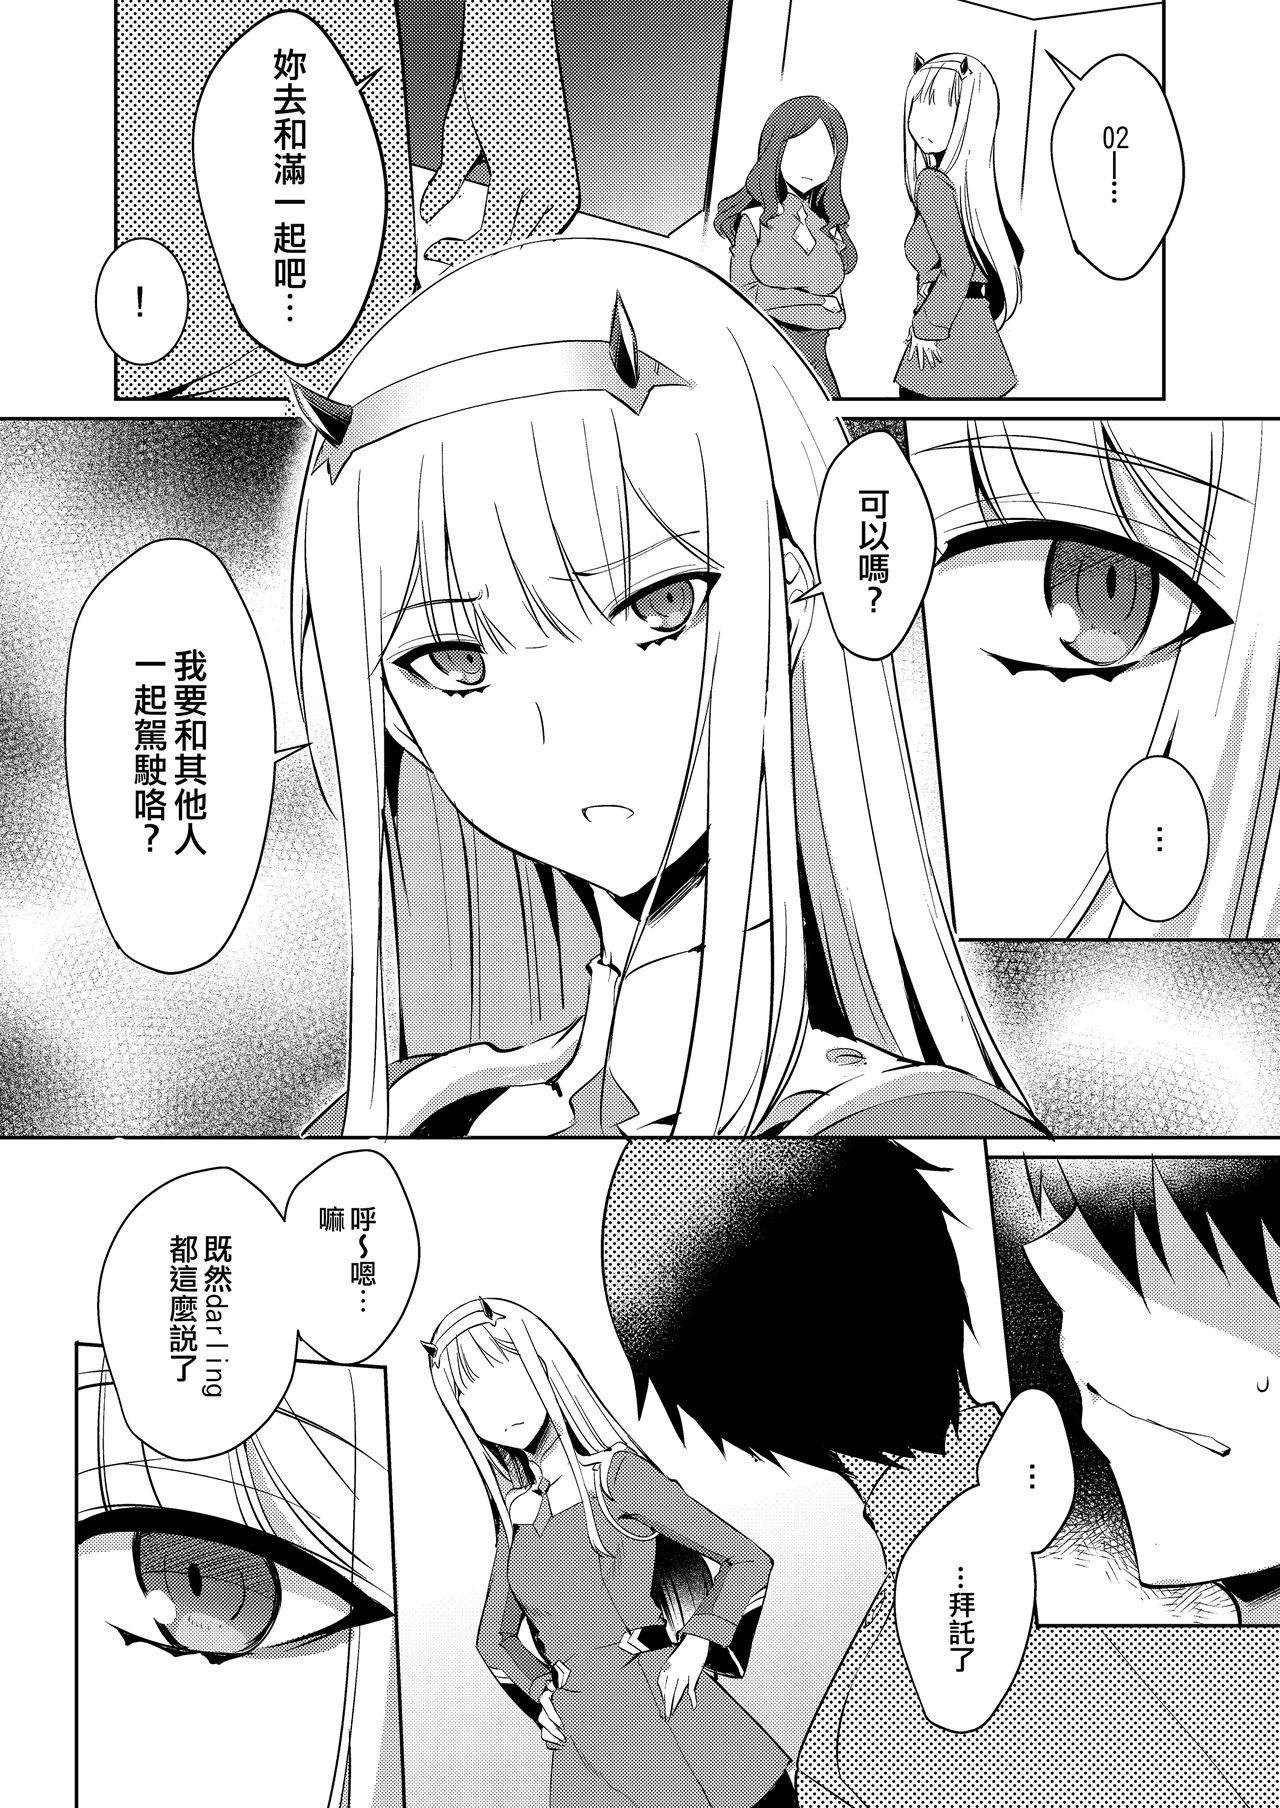 Masseuse Mitsuru in the Zero Two - Darling in the franxx New - Page 7